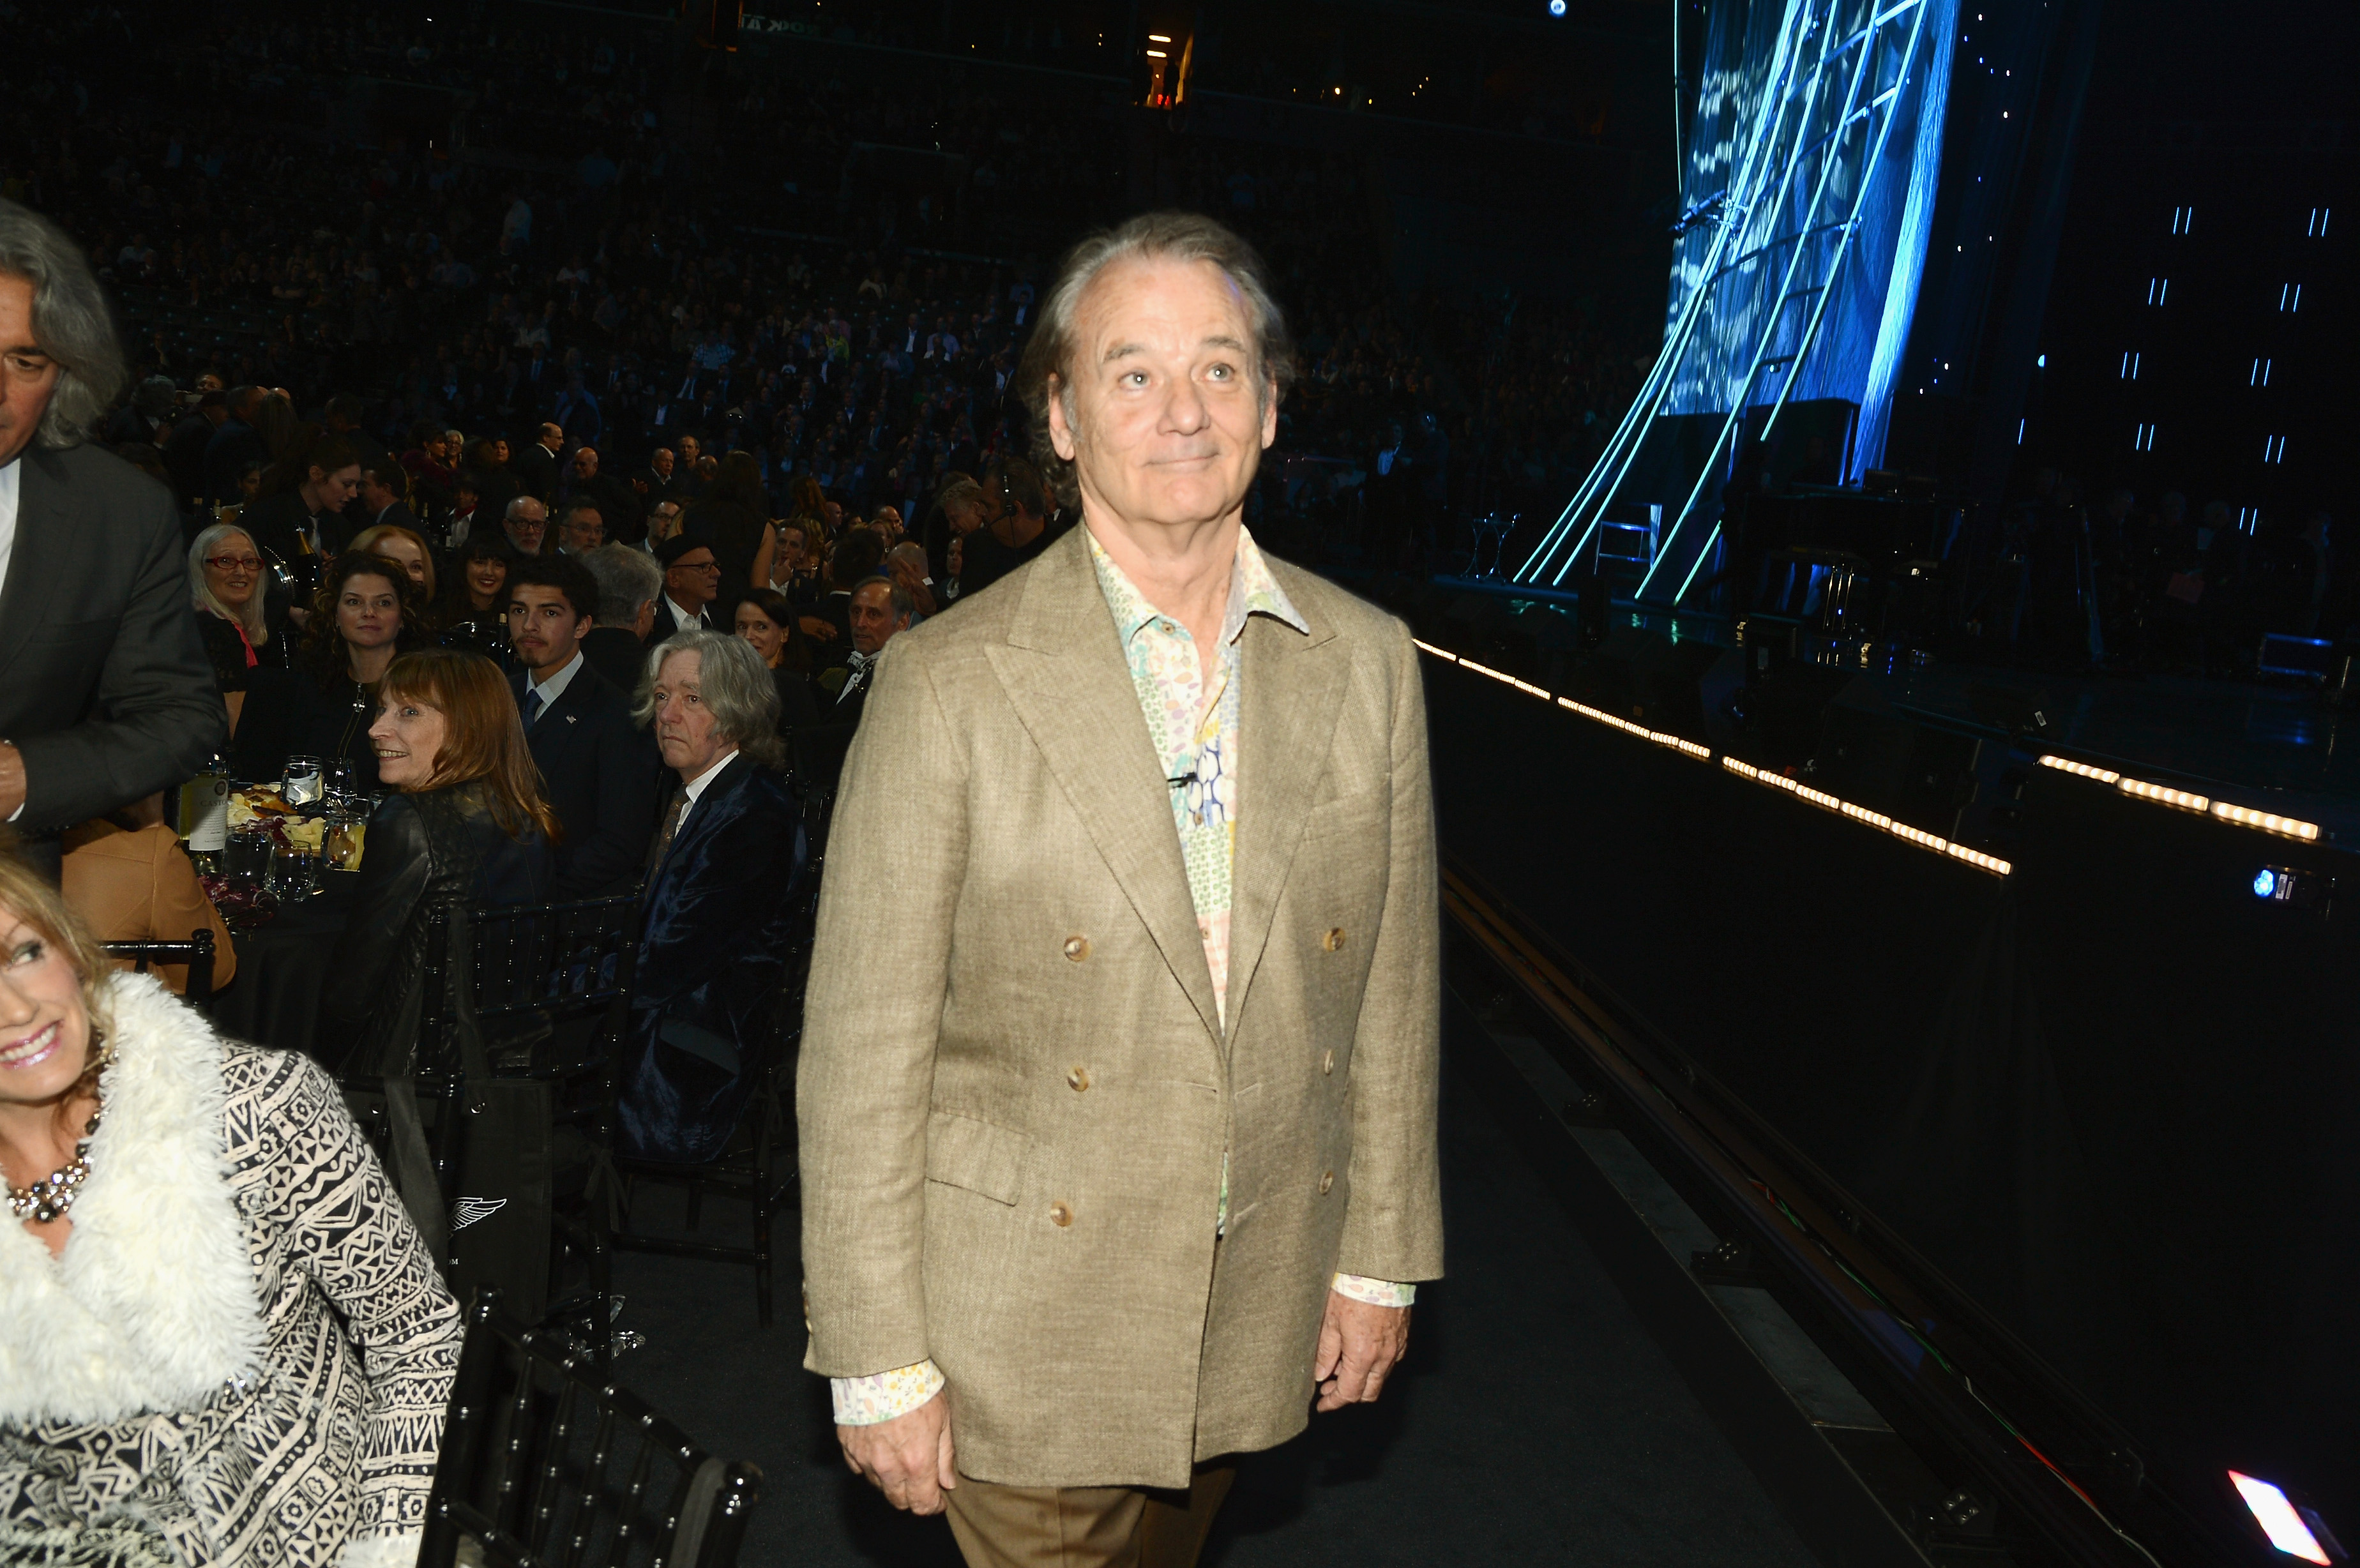 Actor Bill Murray attends the 29th Annual Rock And Roll Hall Of Fame Induction Ceremony at Barclays Center of Brooklyn on April 10, 2014 in New York City. (Theo Wargo — WireImage/Getty Images)